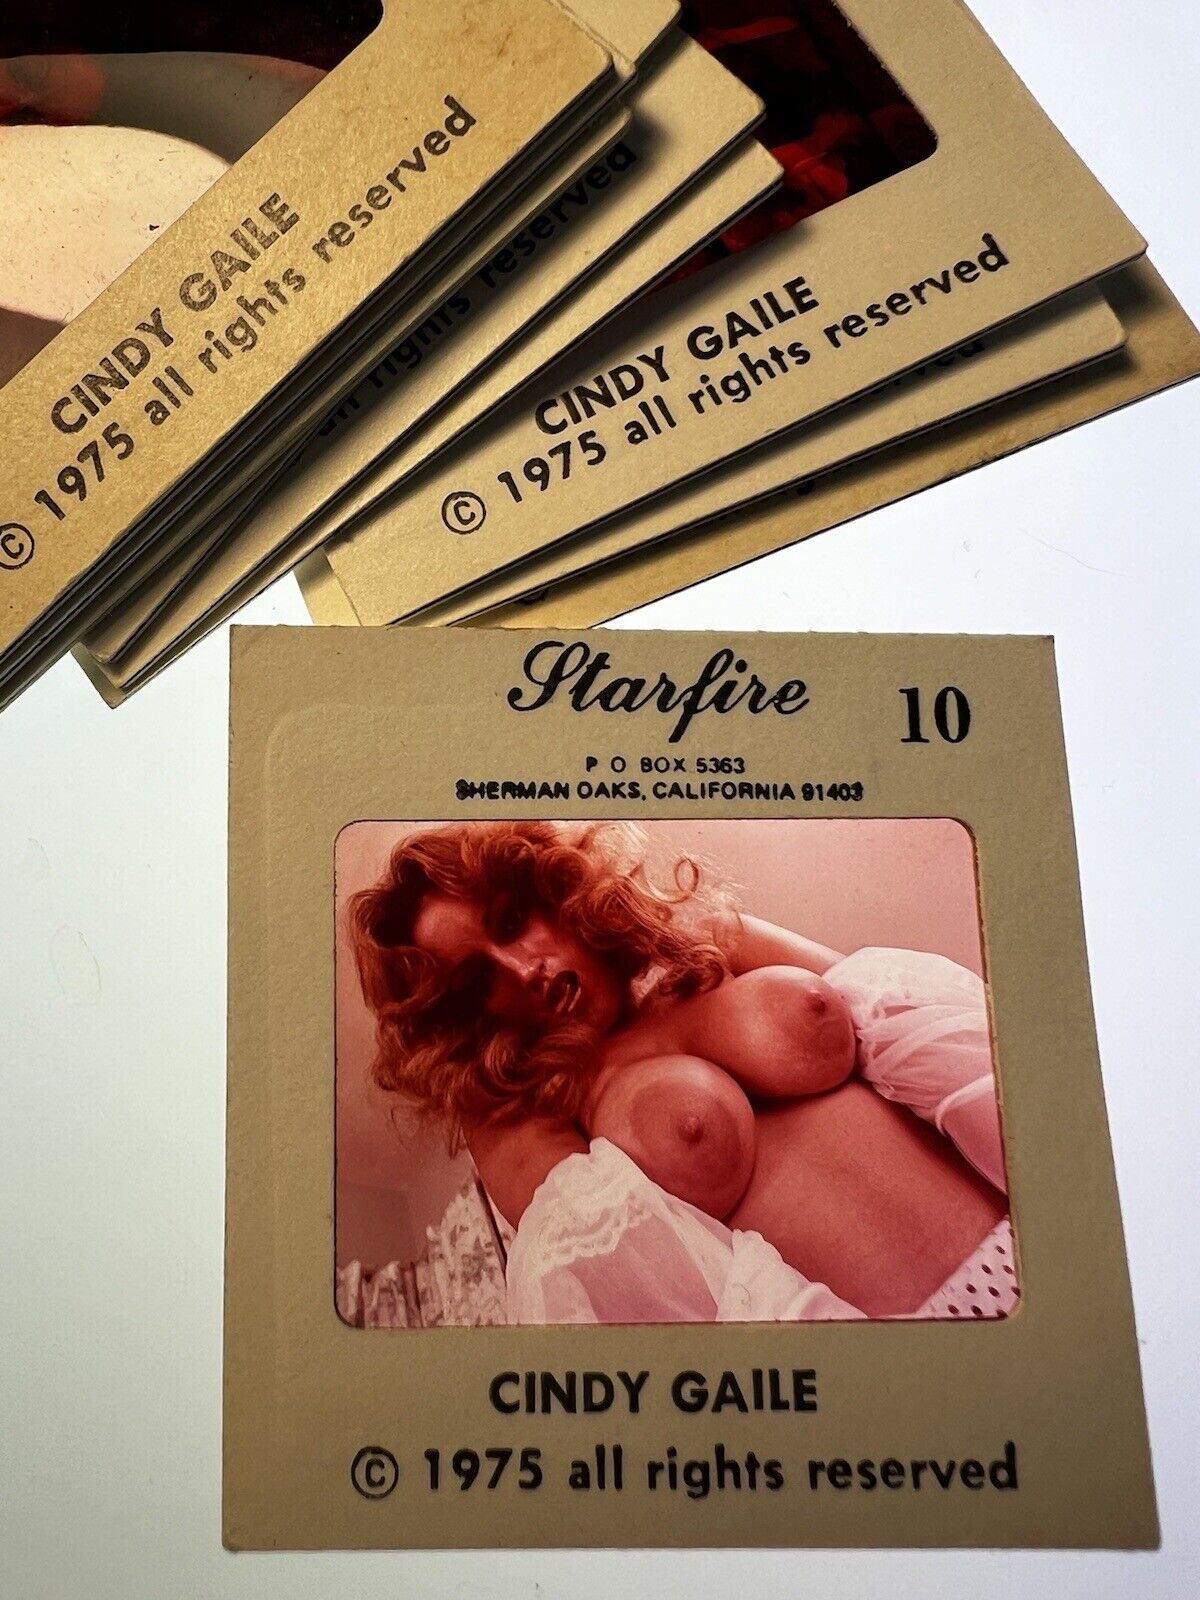 Vtg 70’s 35mm Slides Transparency Risque Pinup Girl Busty Glamour Lot X10 #357